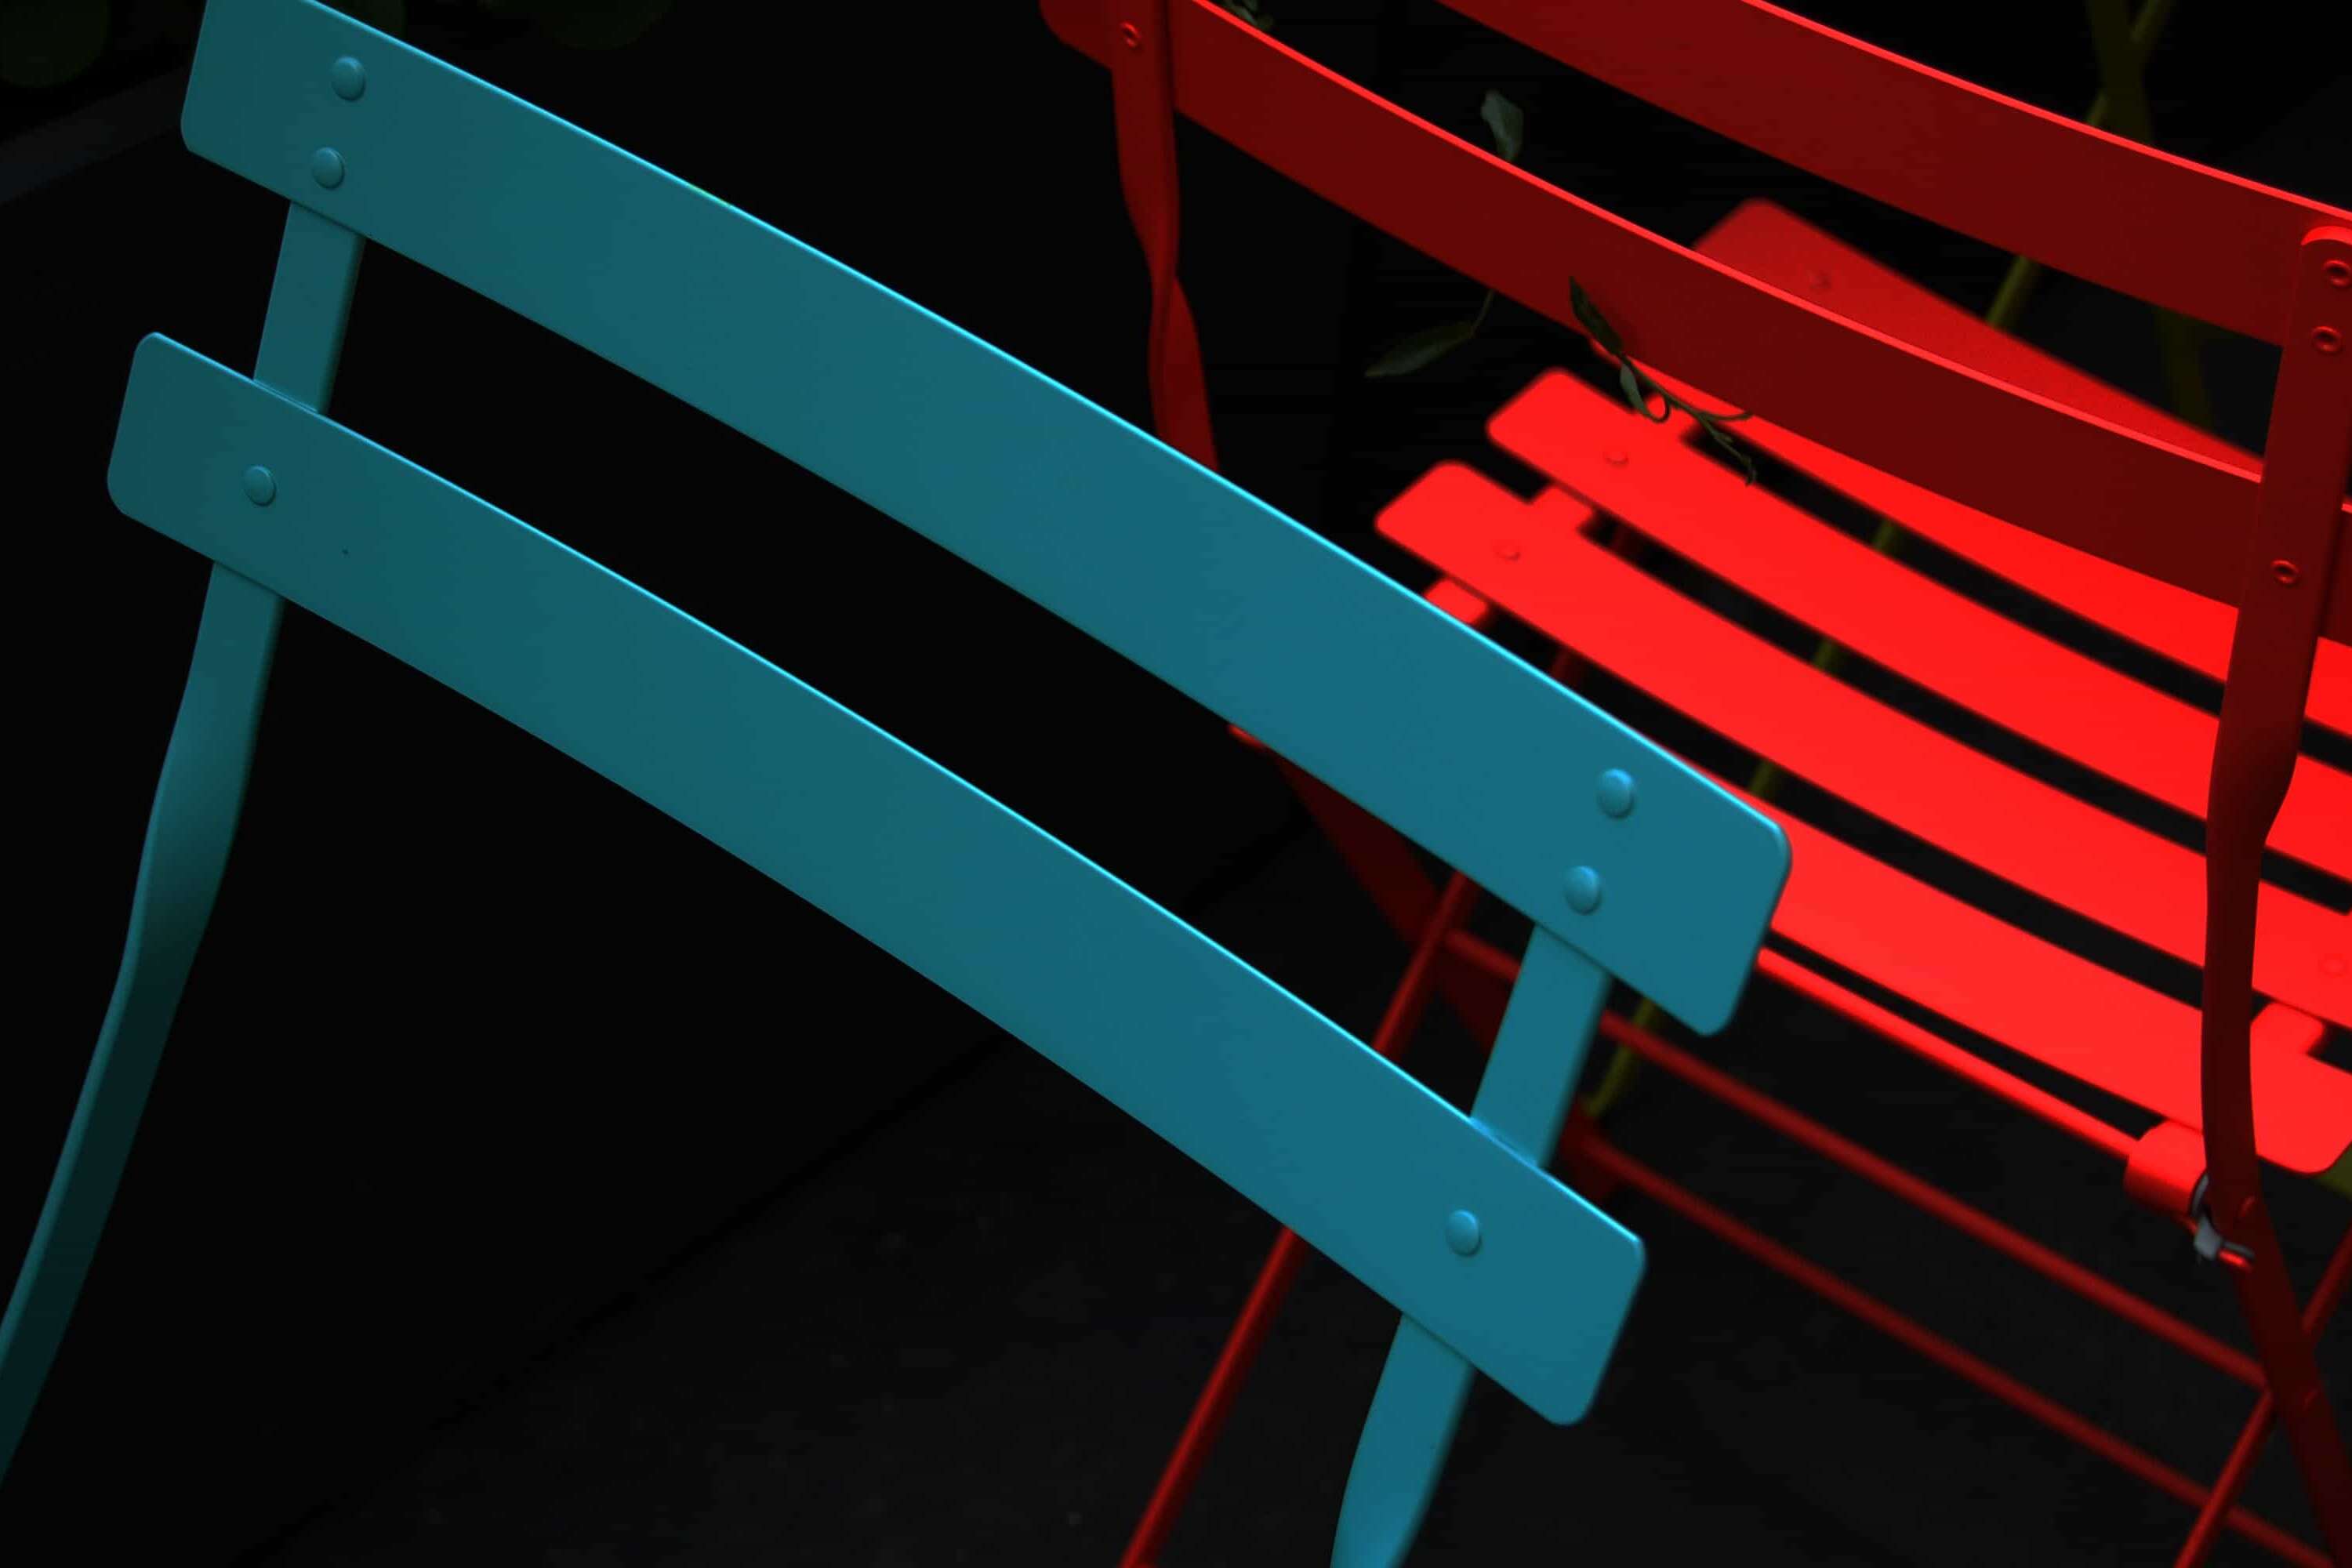 Red and blue chairs against black background